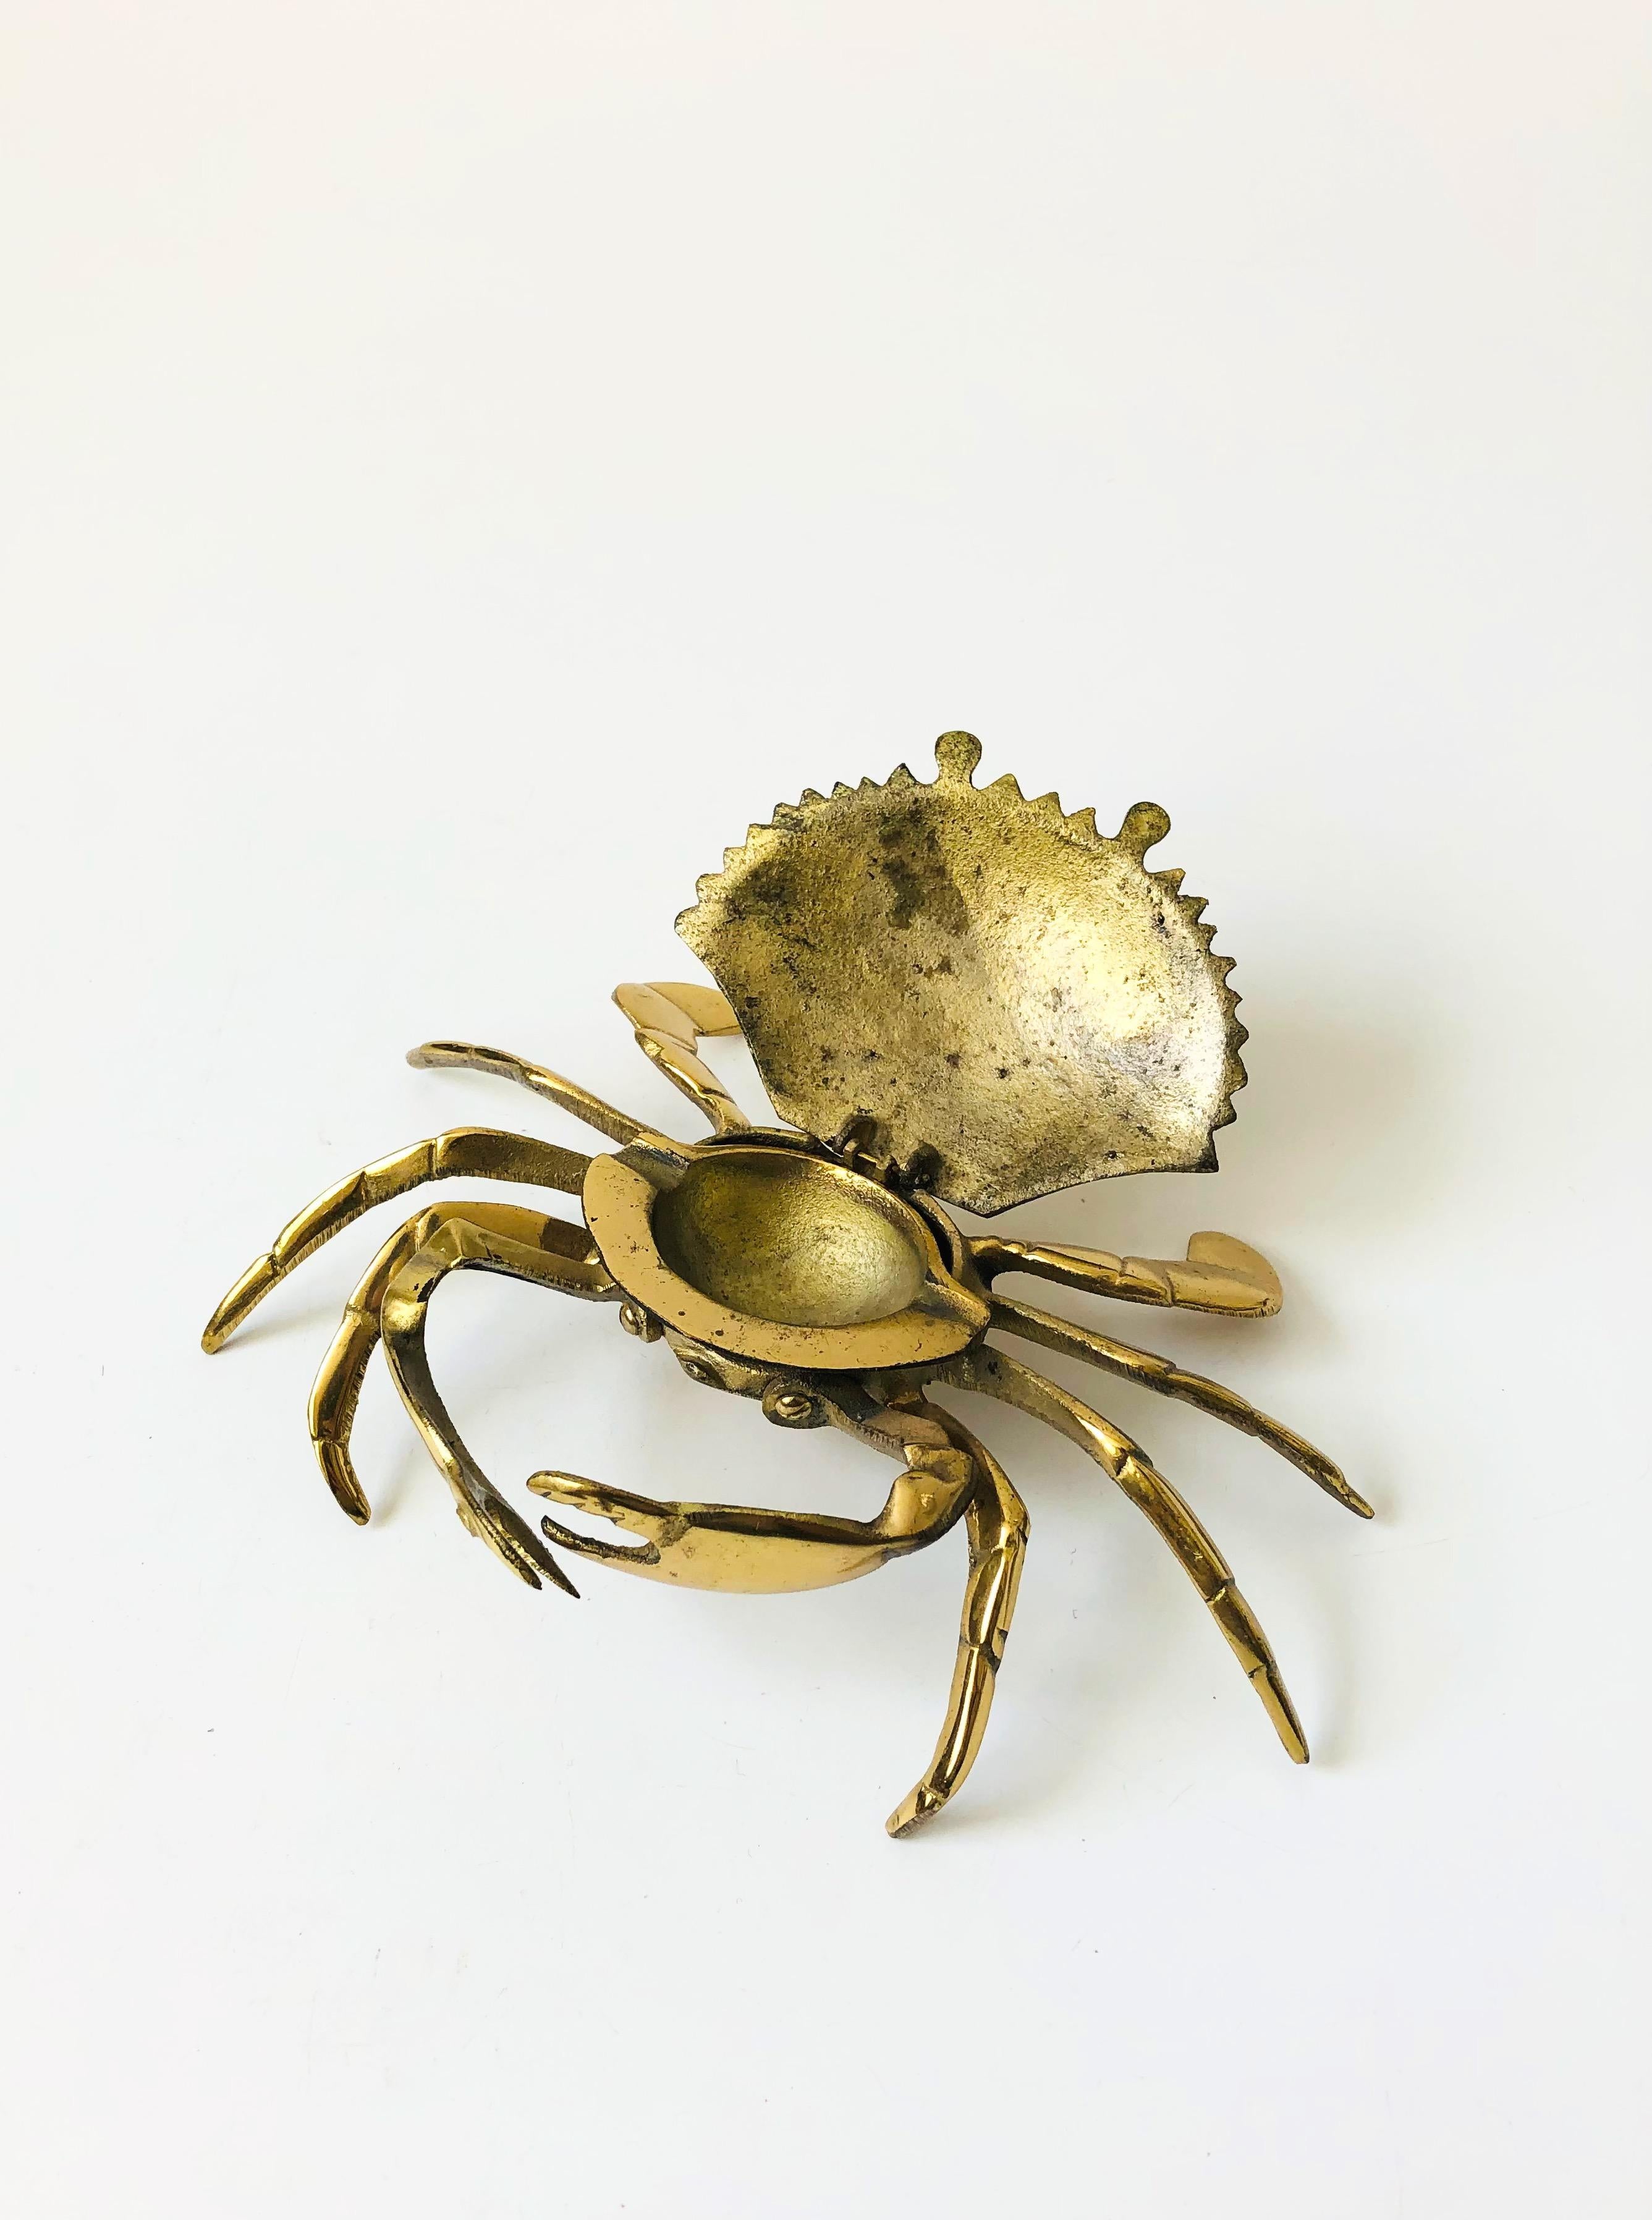 A vintage brass ashtray in the shape of a crab. The top hinges open to reveal an ashtray in the center. The ashtray can be removed so the crab could also be used as a box for storing small items. Beautiful detailing formed into the brass to create